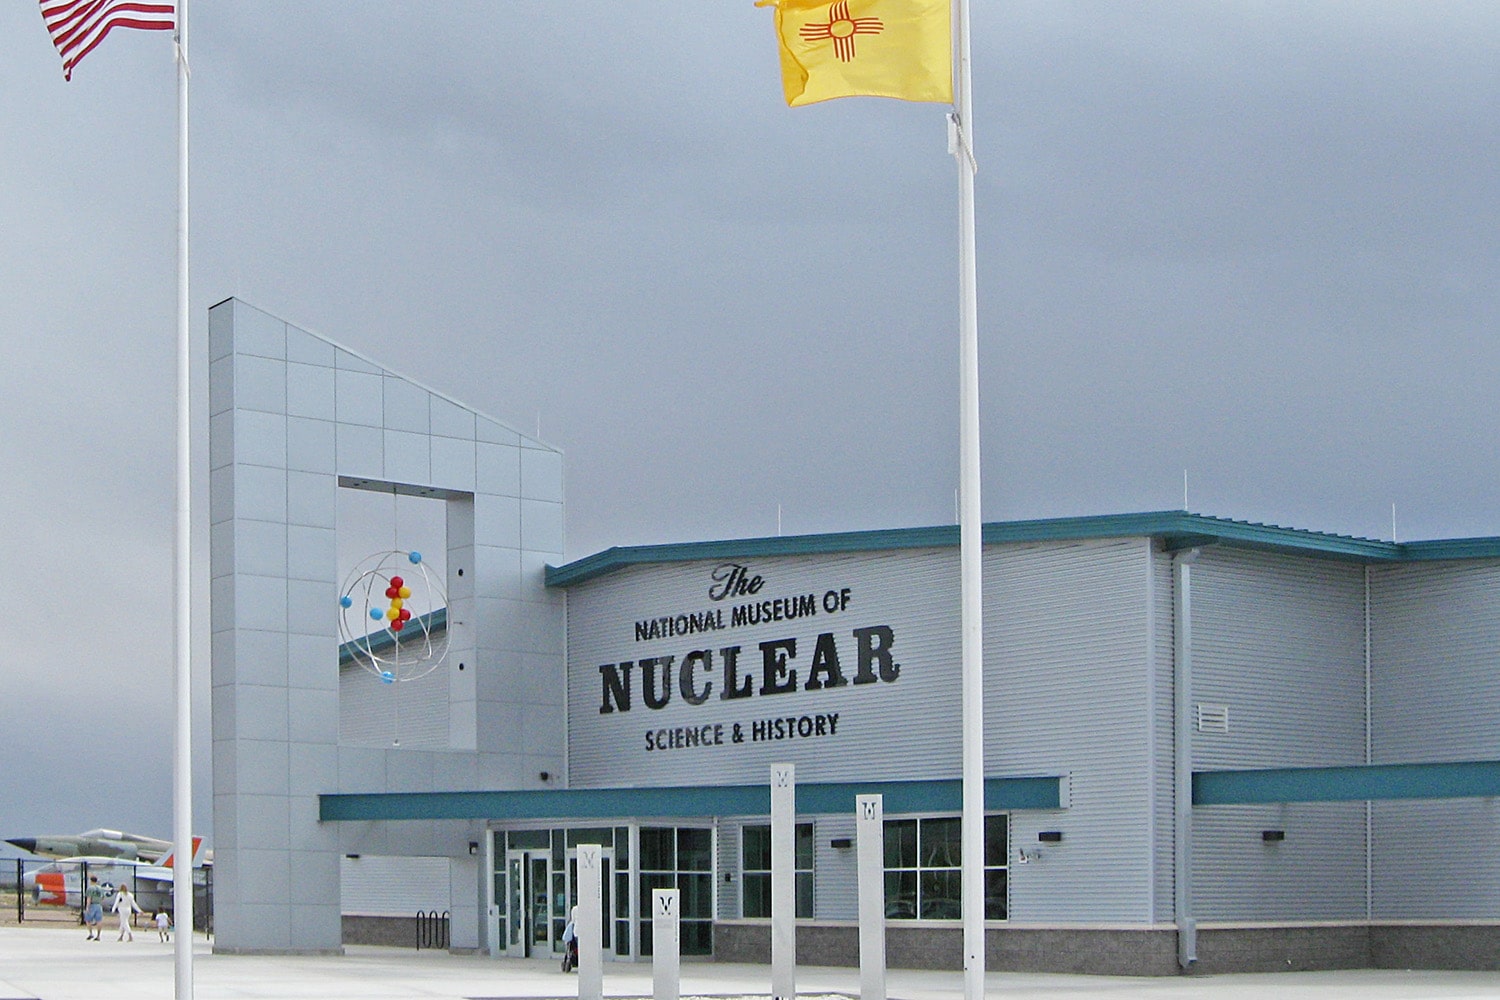 National Museum of Nuclear Science & History is one of our favorite things to do